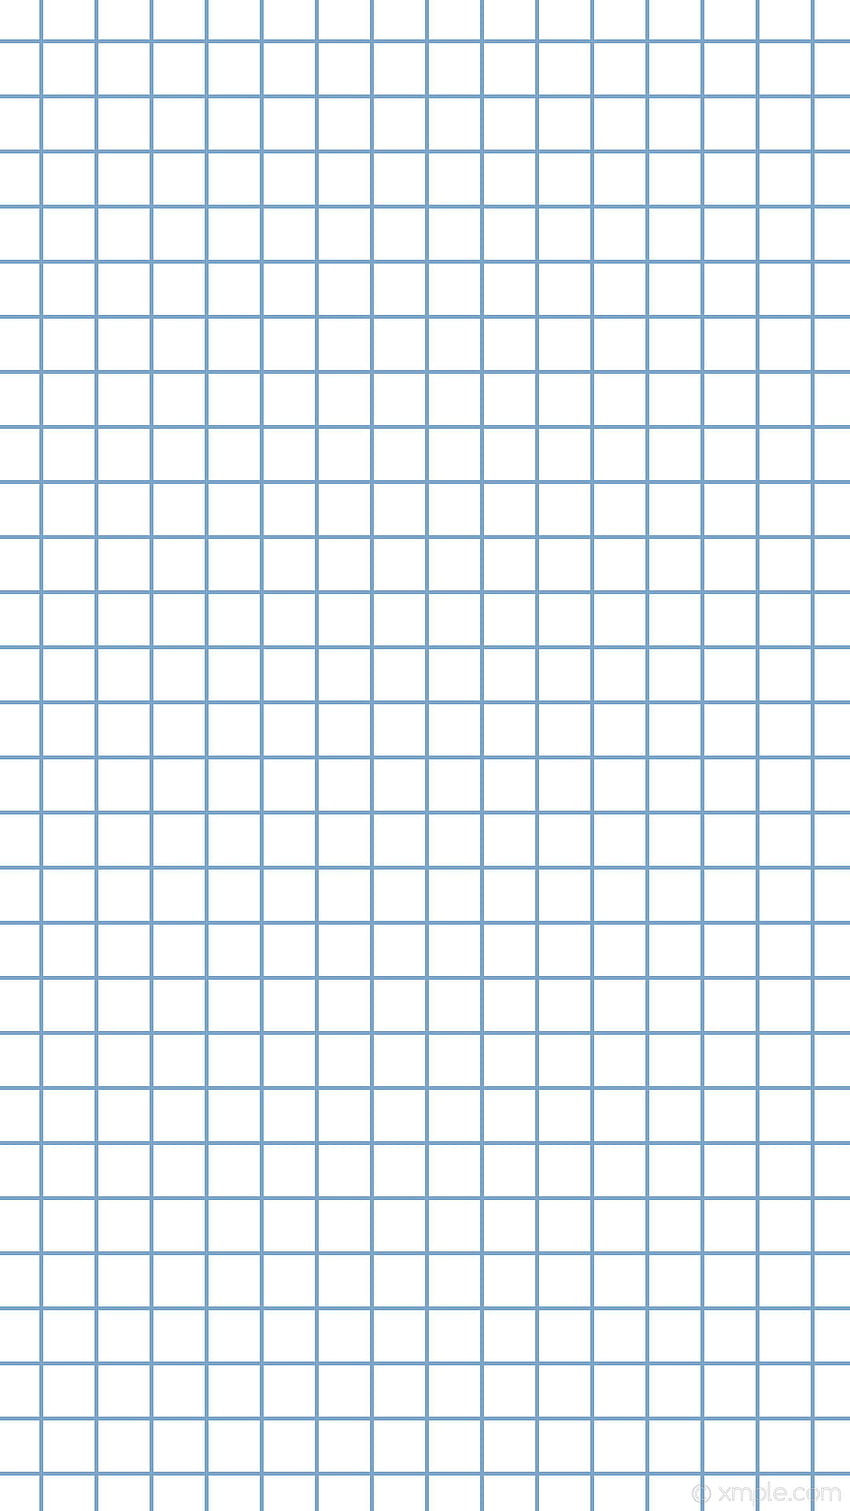 A blank graph paper with squares - Grid